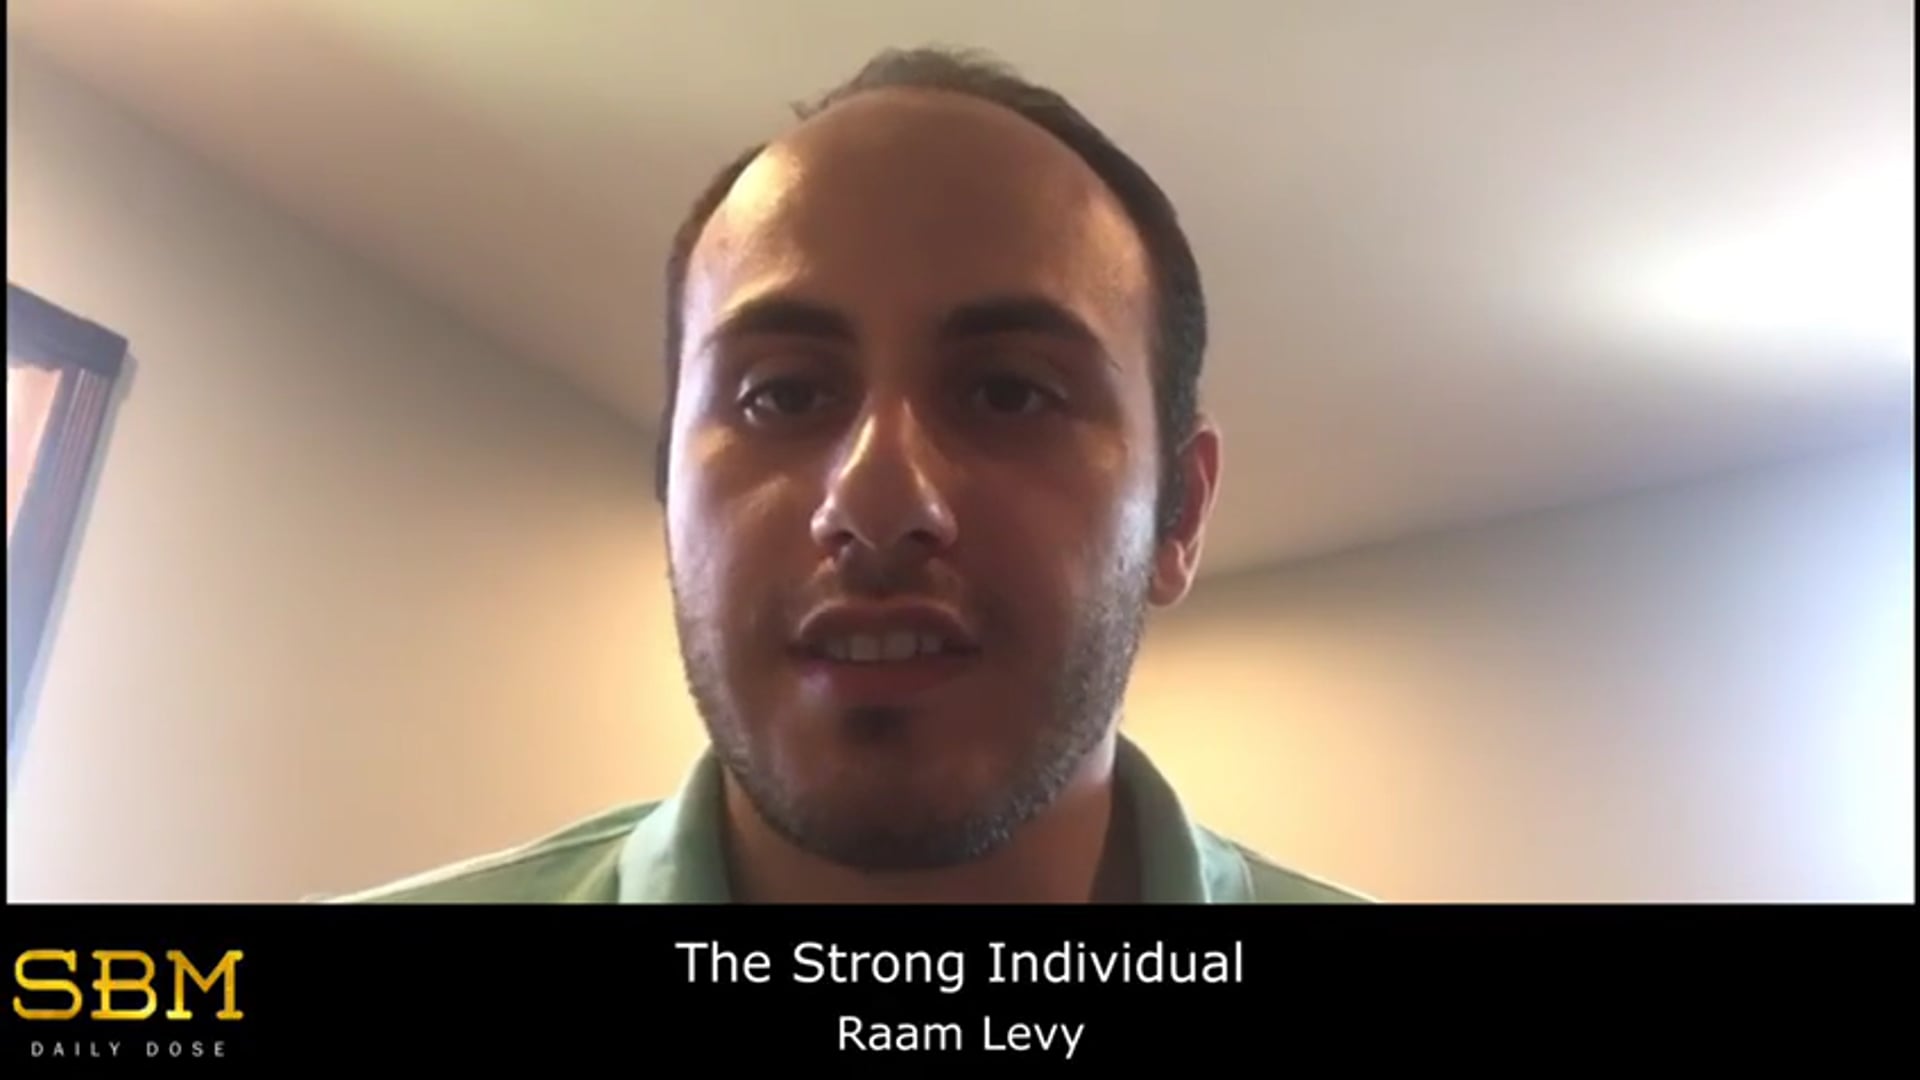 The Strong Individual - Raam Levy